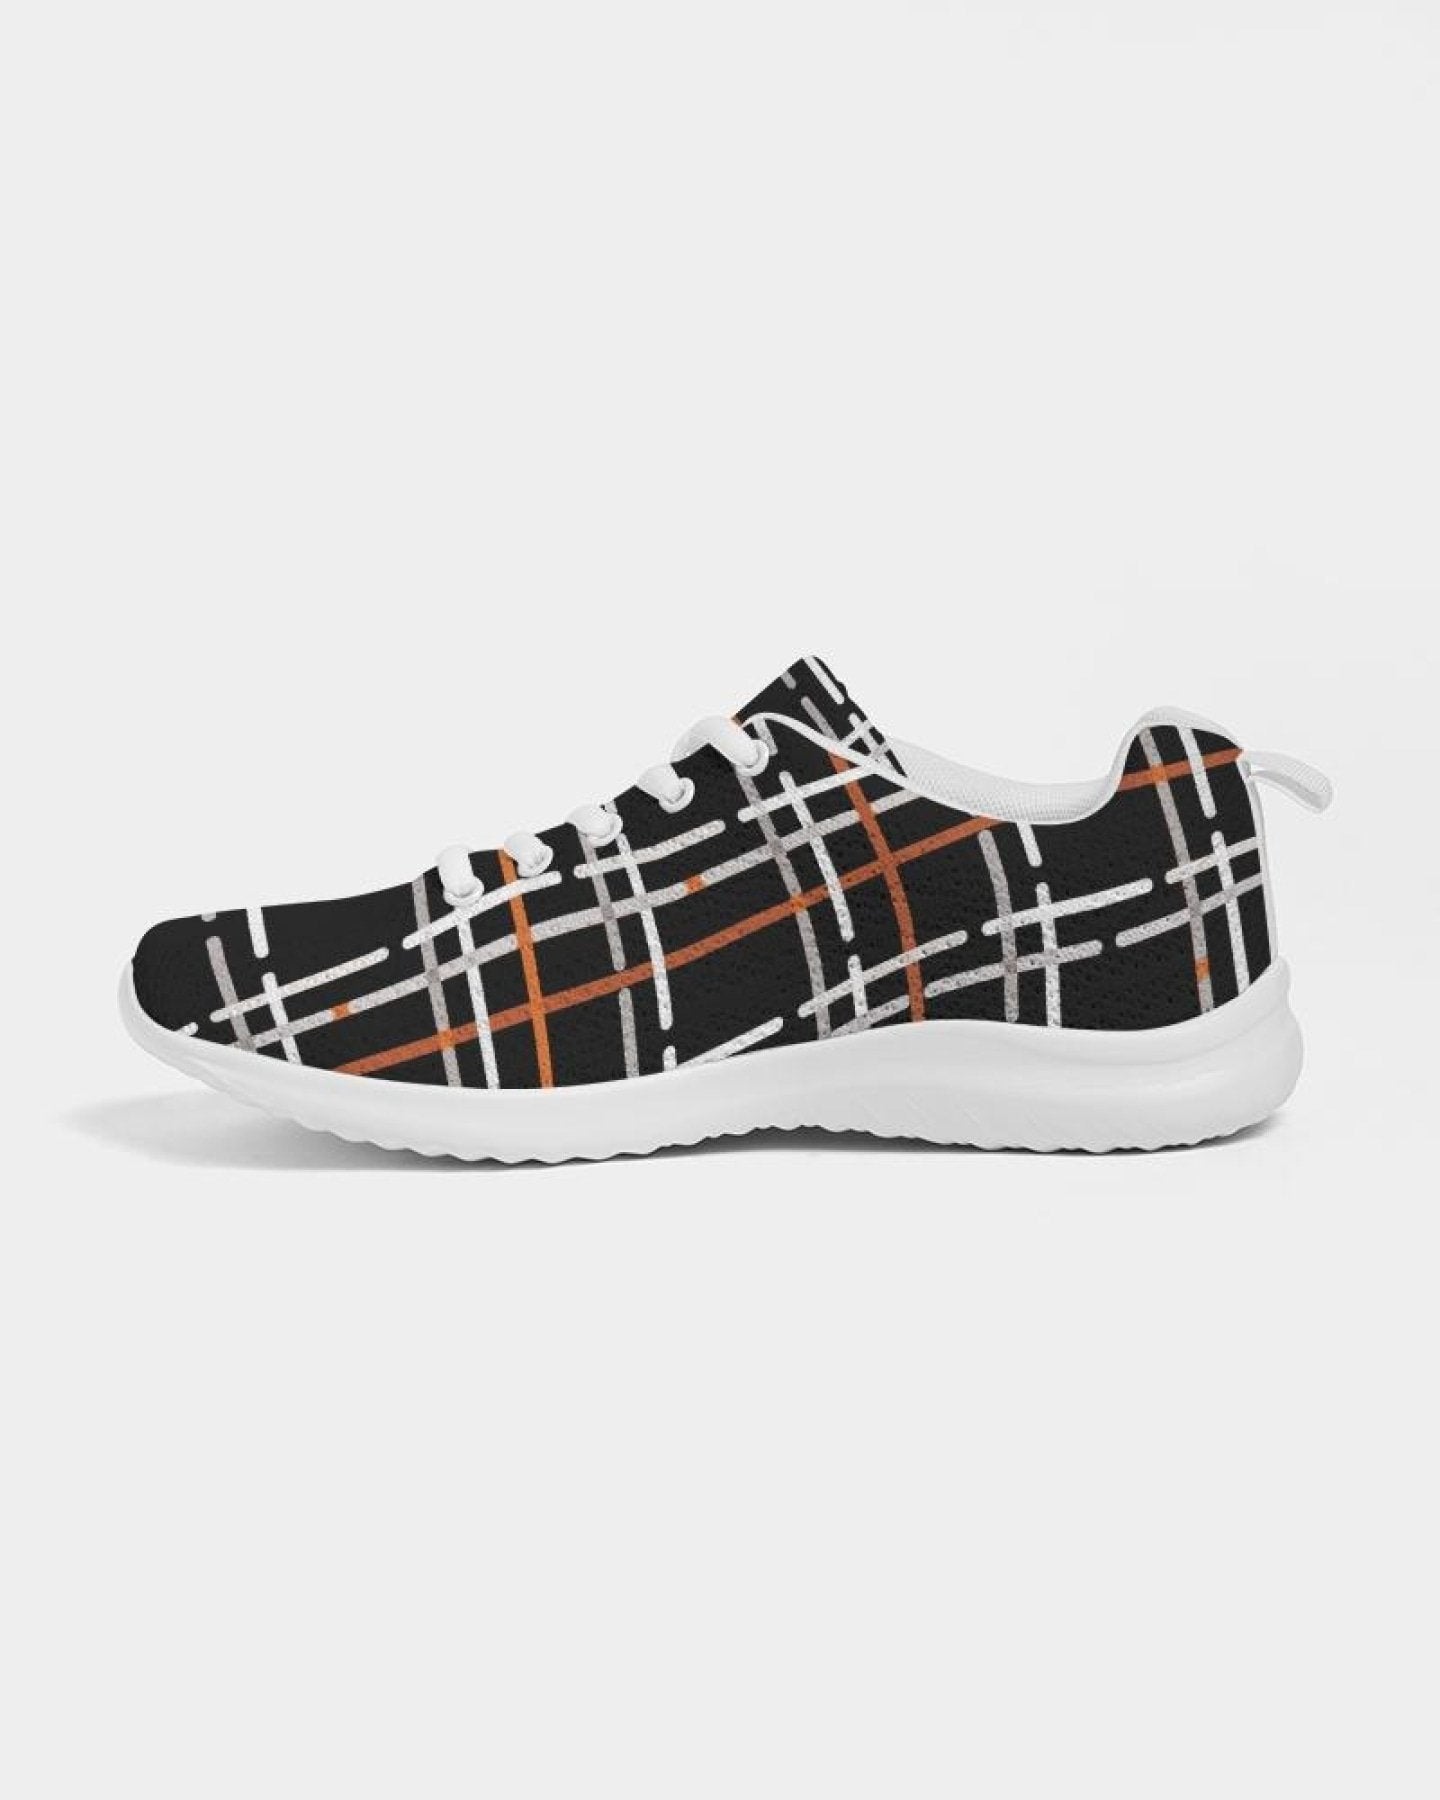 Uniquely You Womens Sneakers - Black Plaid Style Low Top Canvas